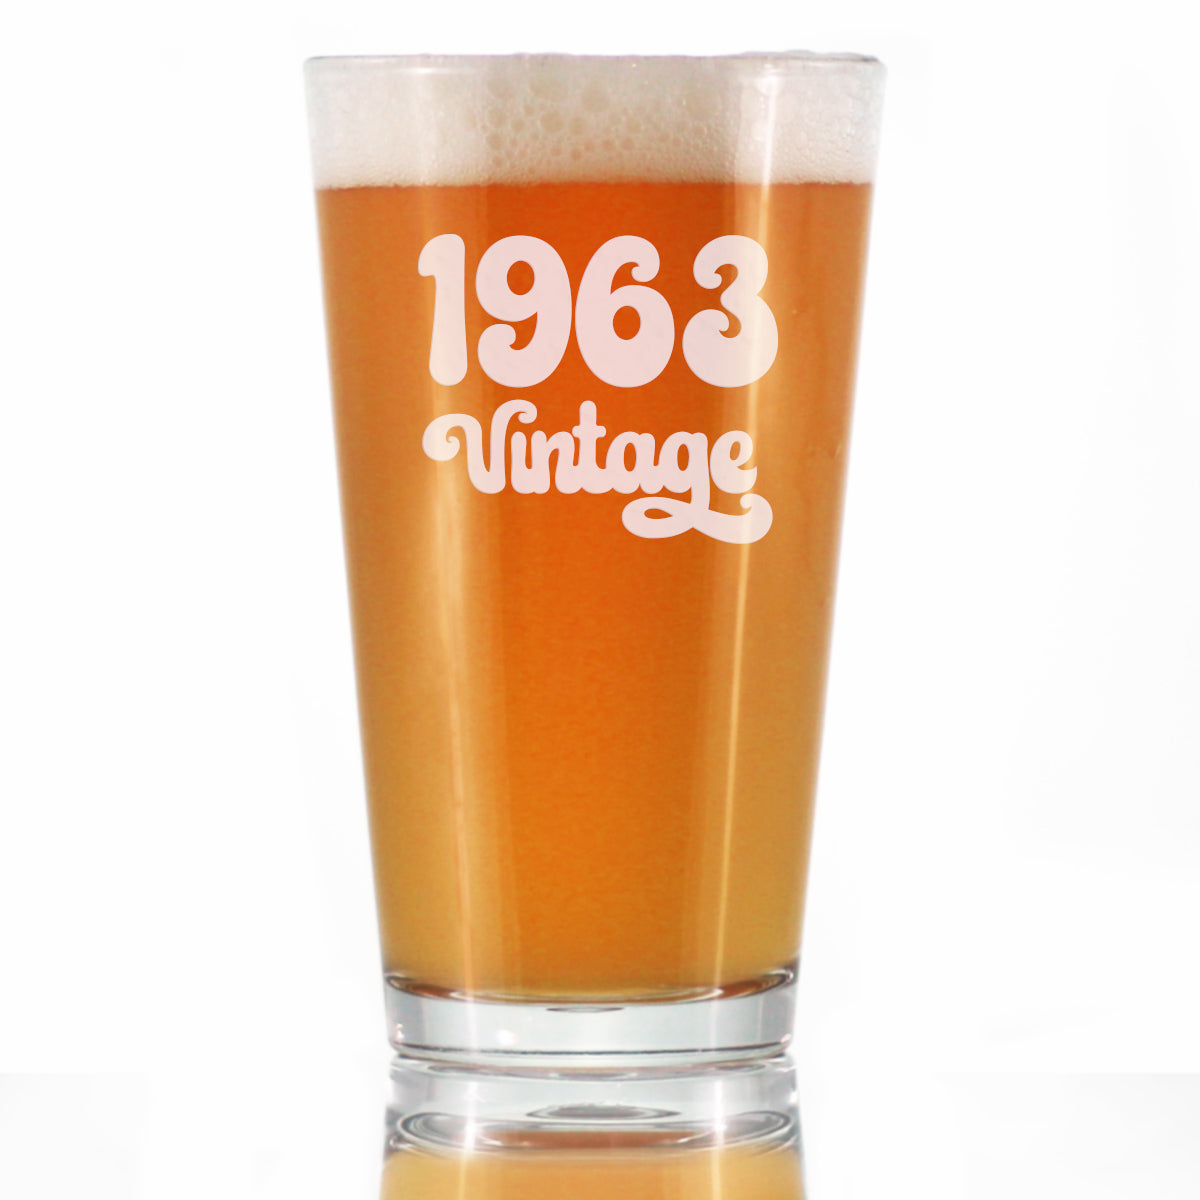 Vintage 1963 - Pint Glass for Beer - 61st Birthday Gifts for Men or Women Turning 61 - Fun Bday Party Decor - 16 oz